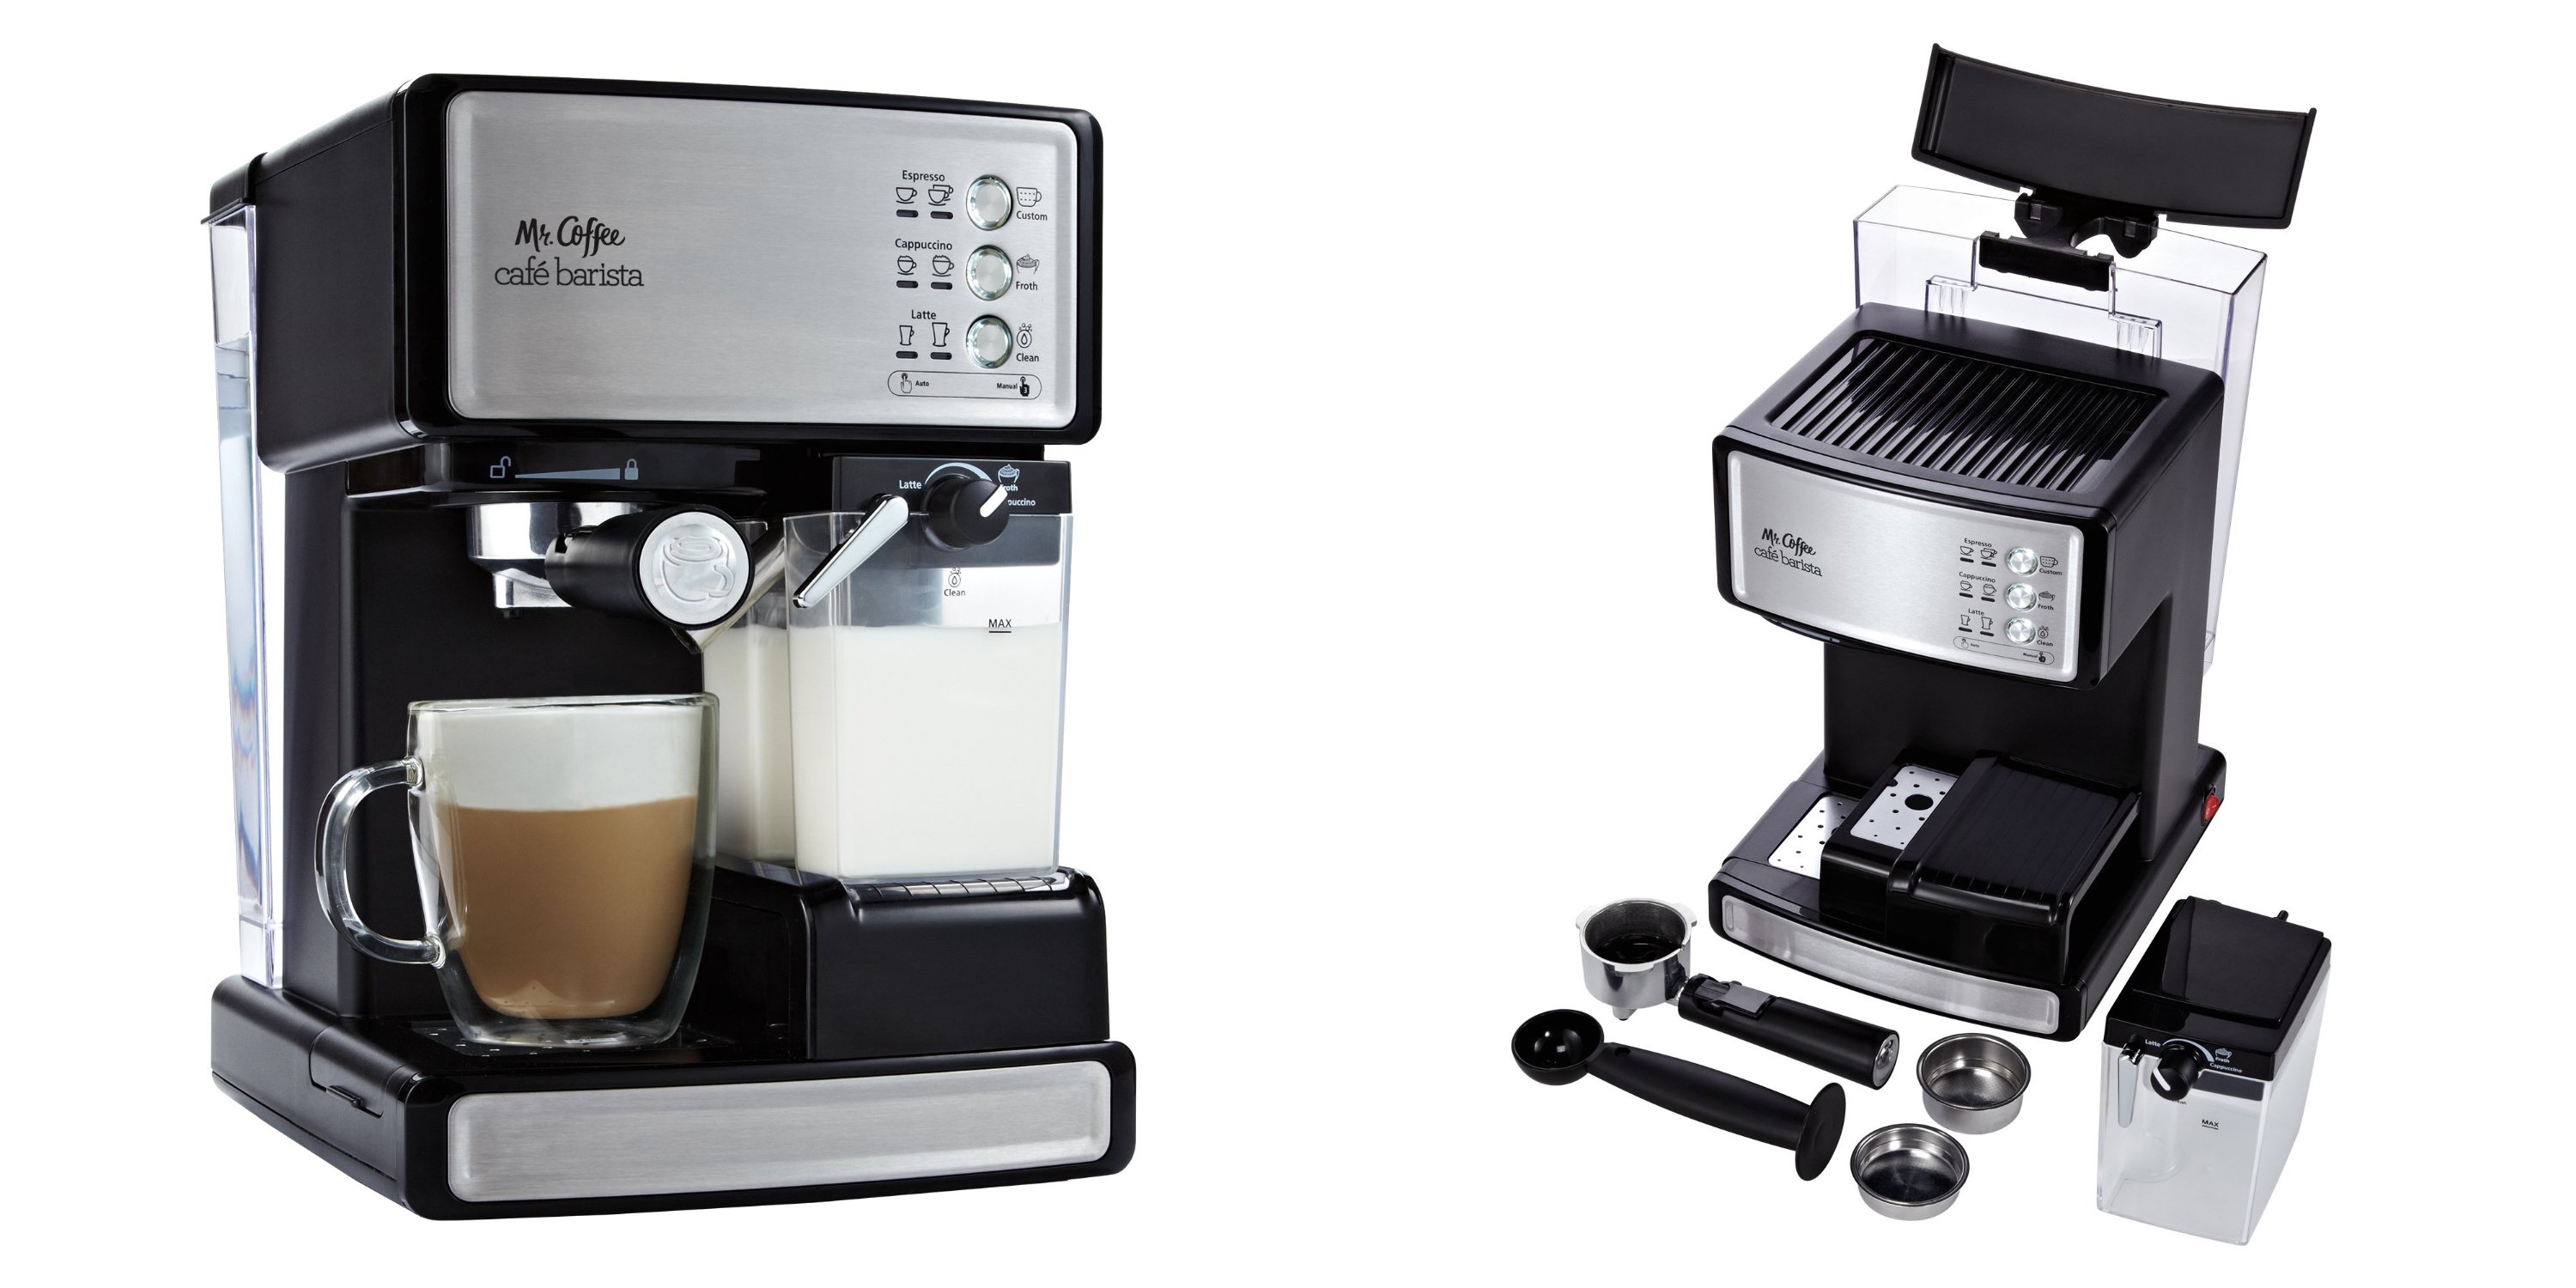 Mr.Coffee-espresso-frother-deal-discount